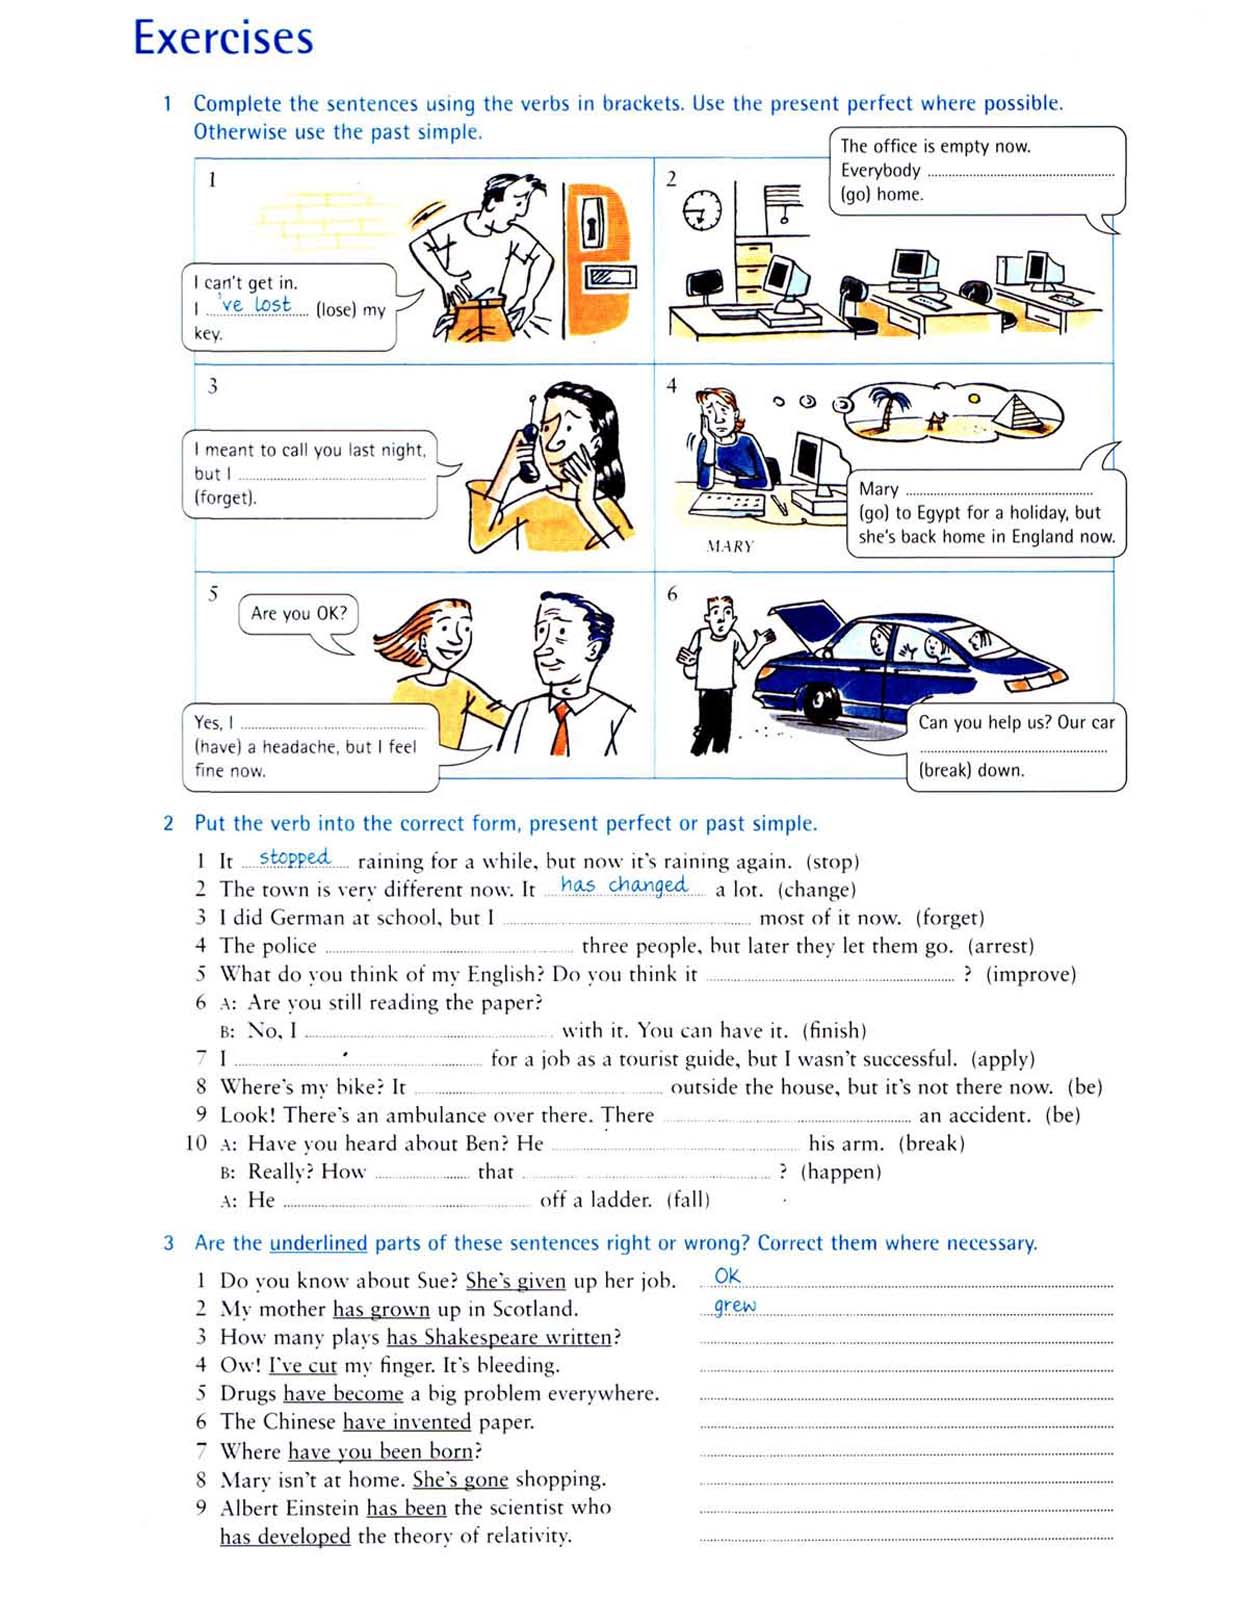 Exercises-present perfect and past 1